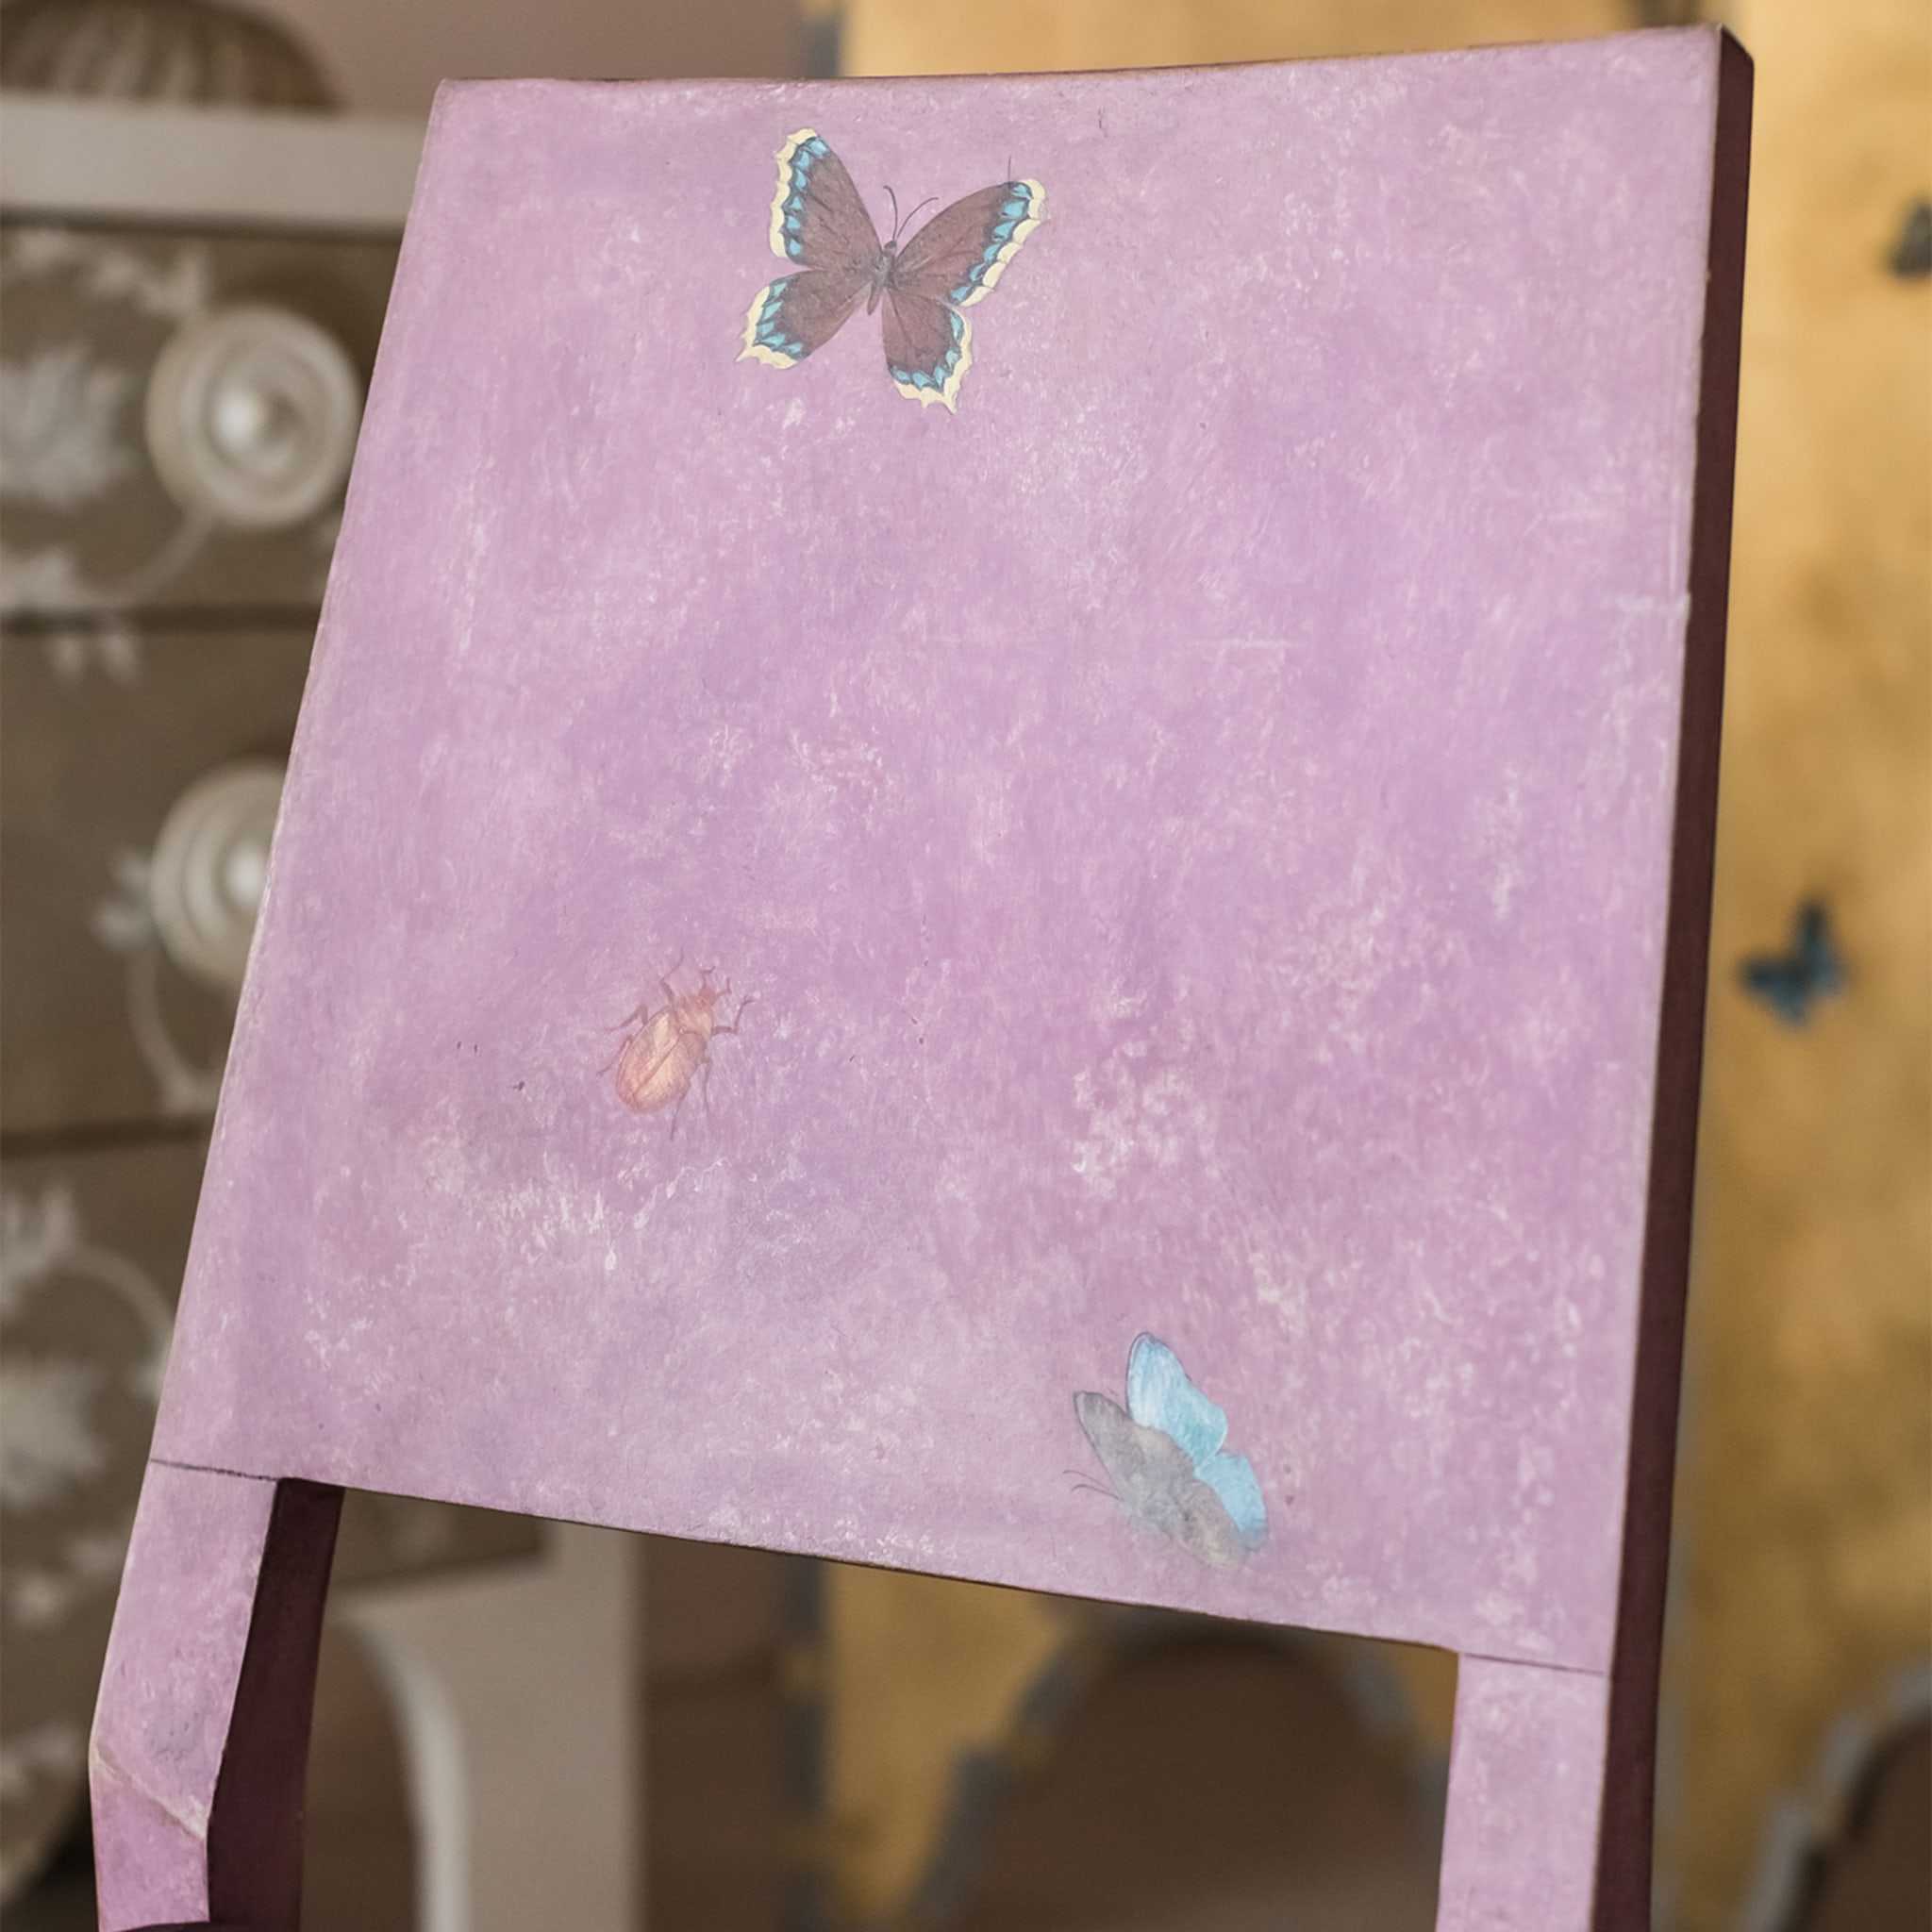 Cremona Violet Indigo with Butterflies Dining Chair - Alternative view 1